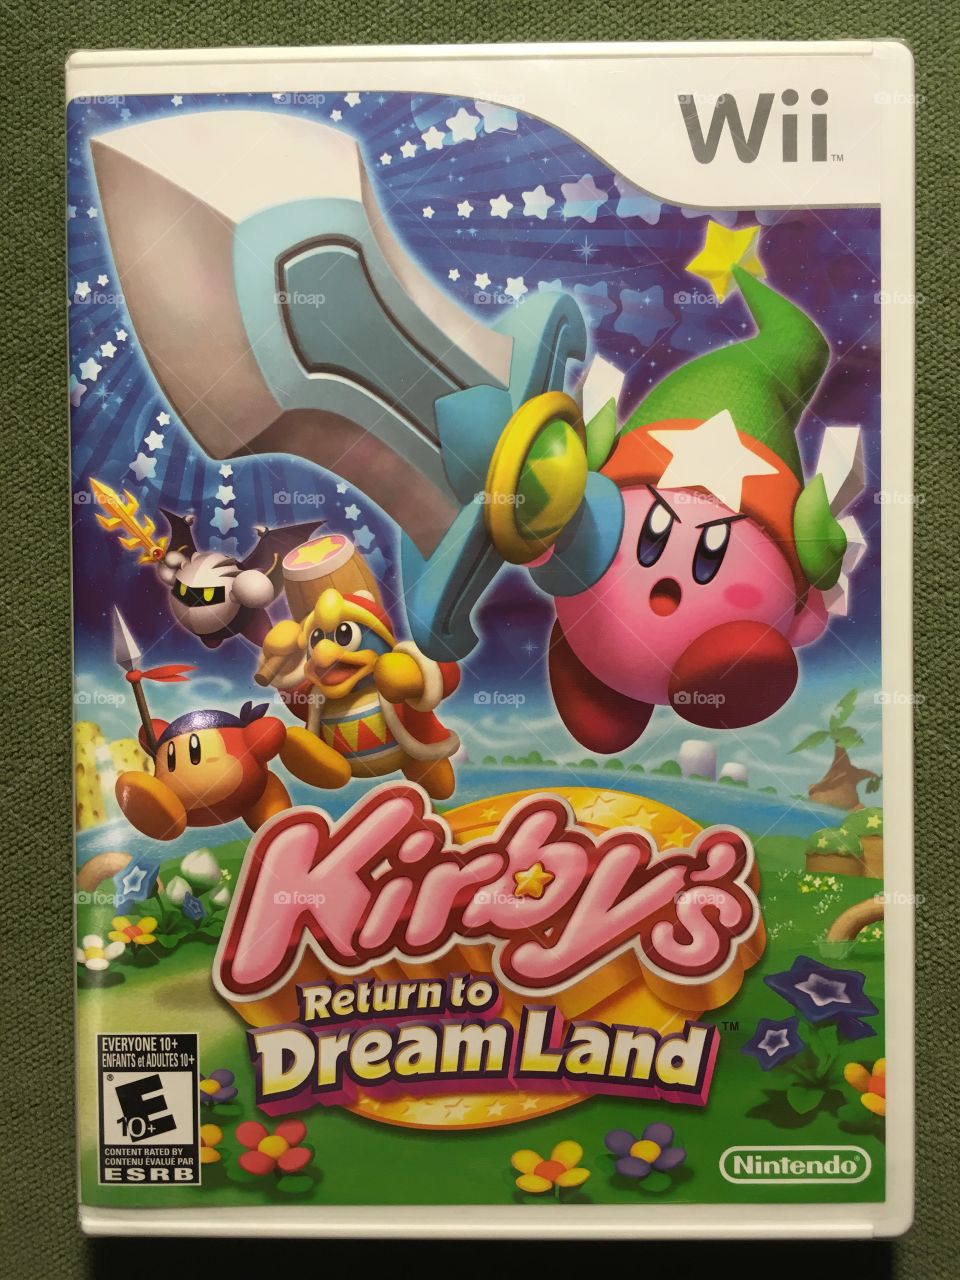 Kirby's Return To Dreamland
Video game for Nintendo Wii
Brand New Sealed 
Released - 2011